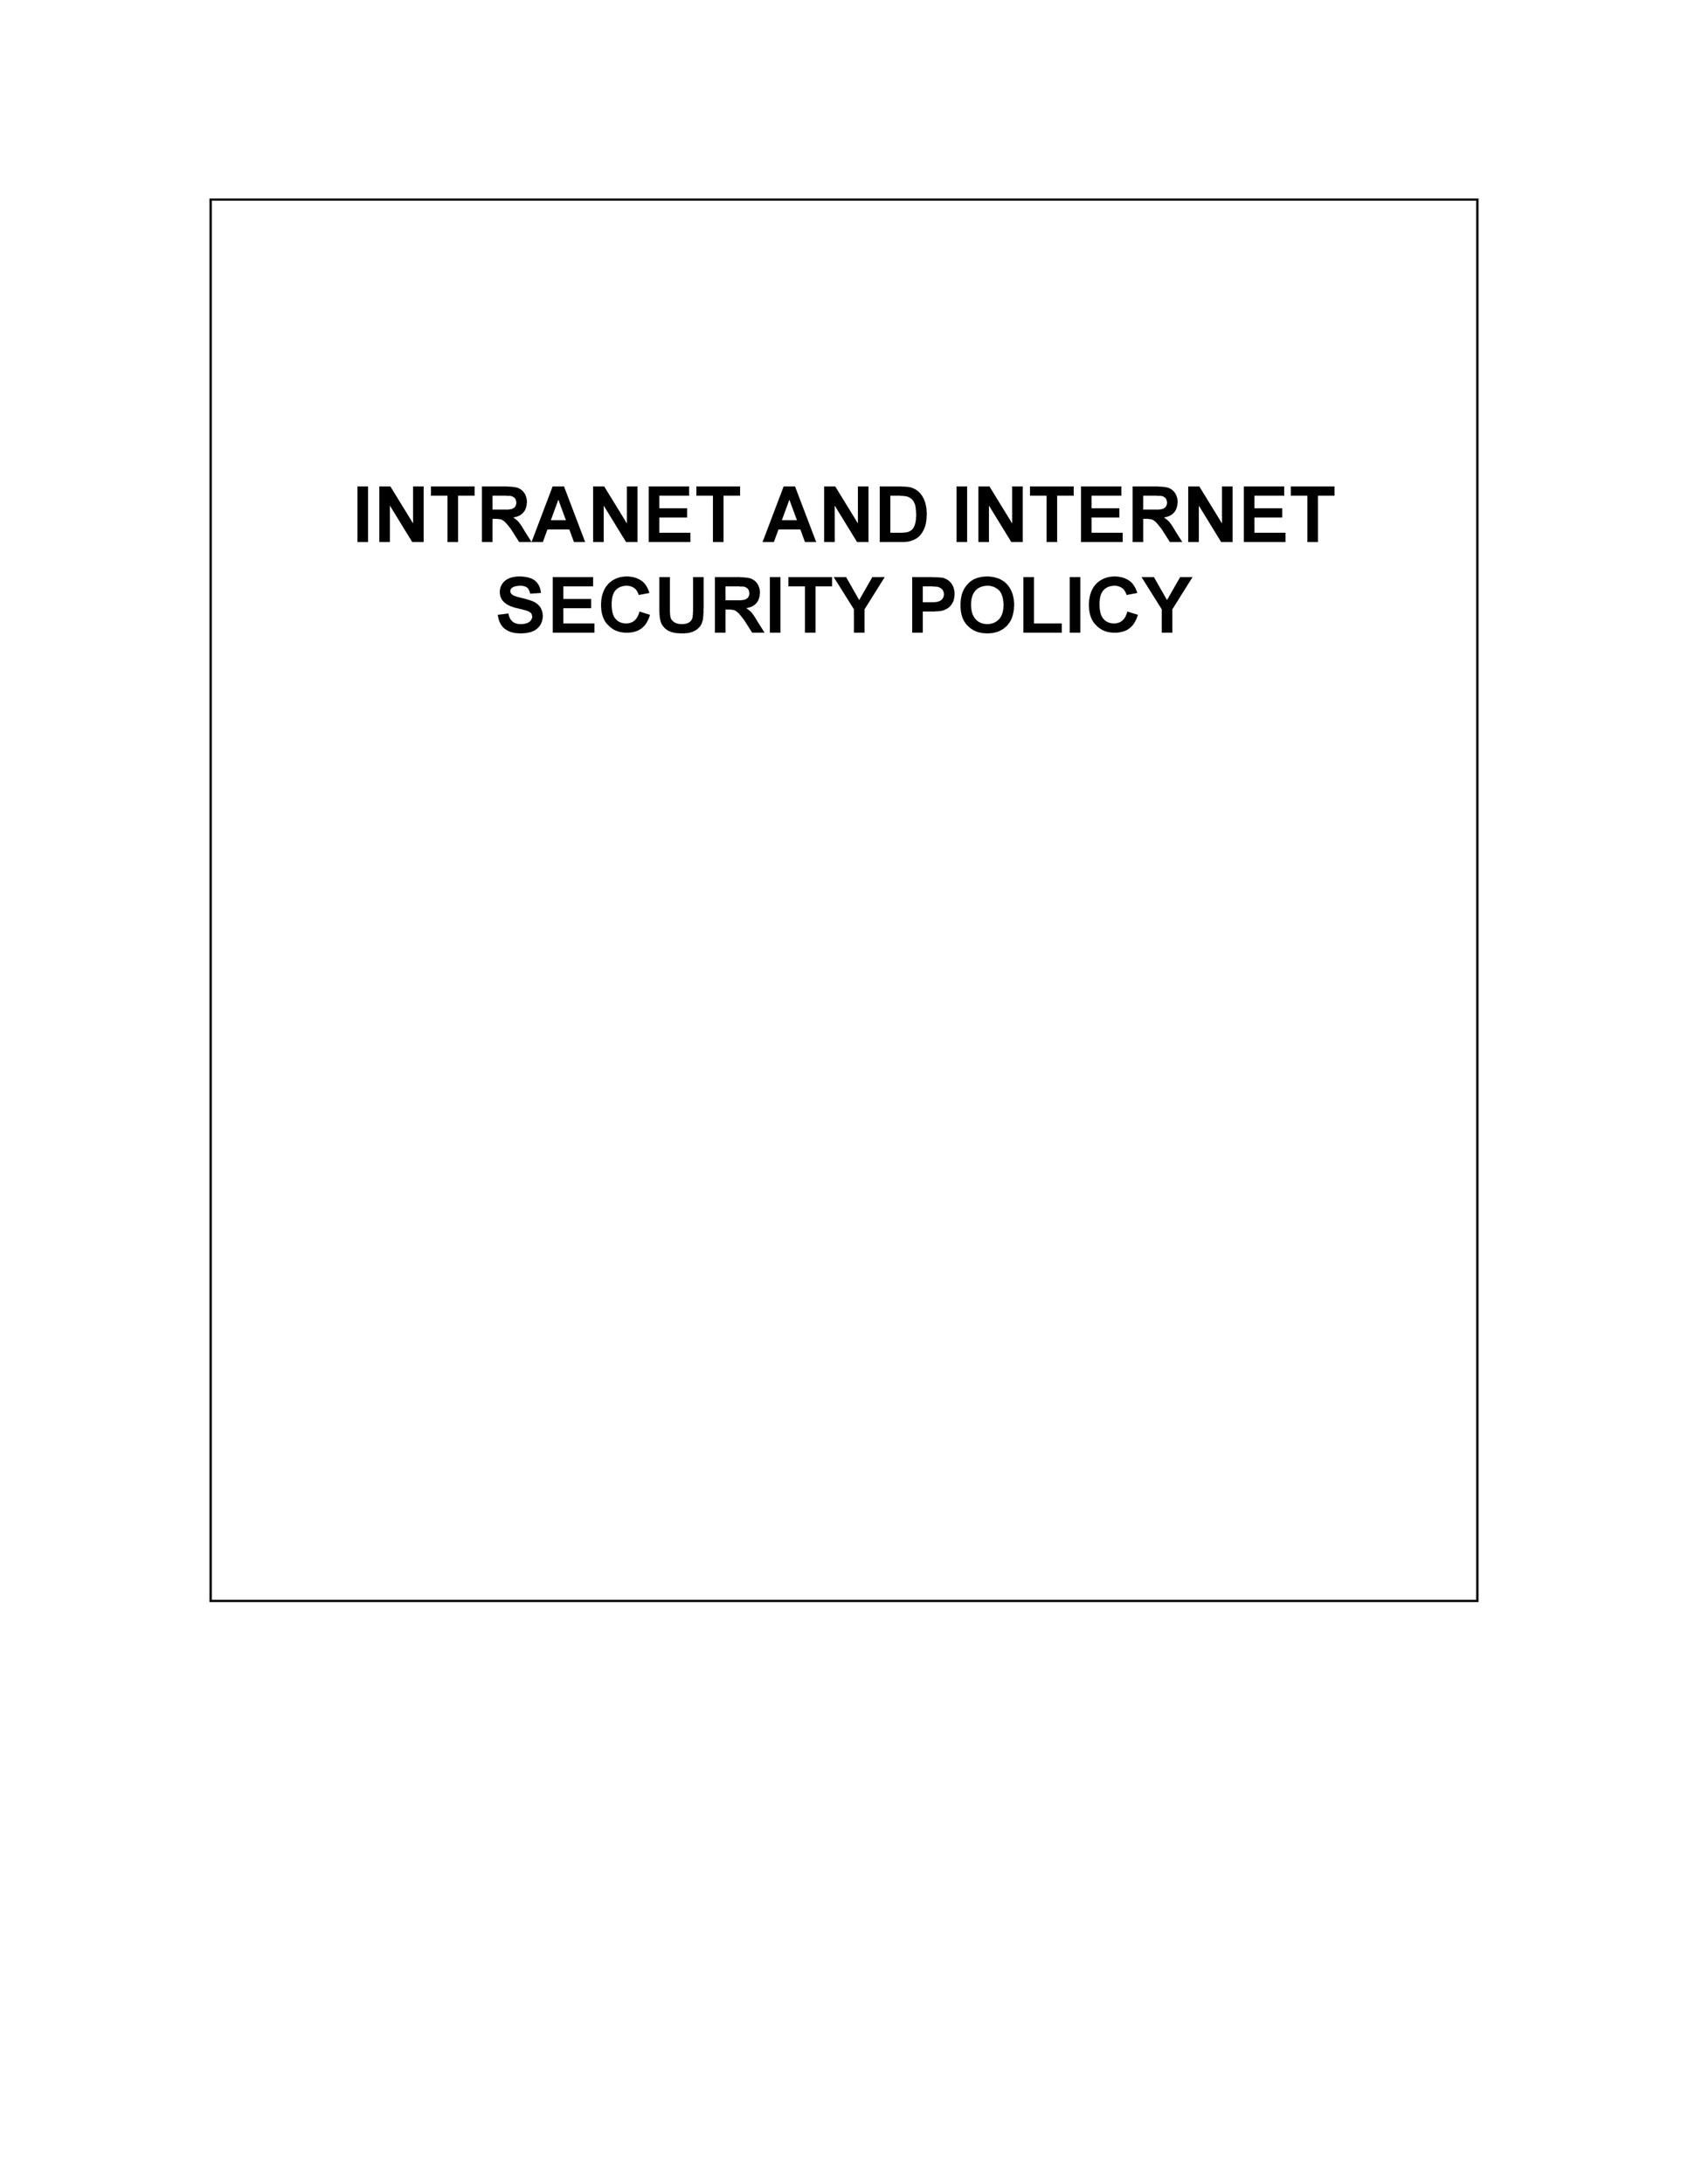 Free Security Policy 27